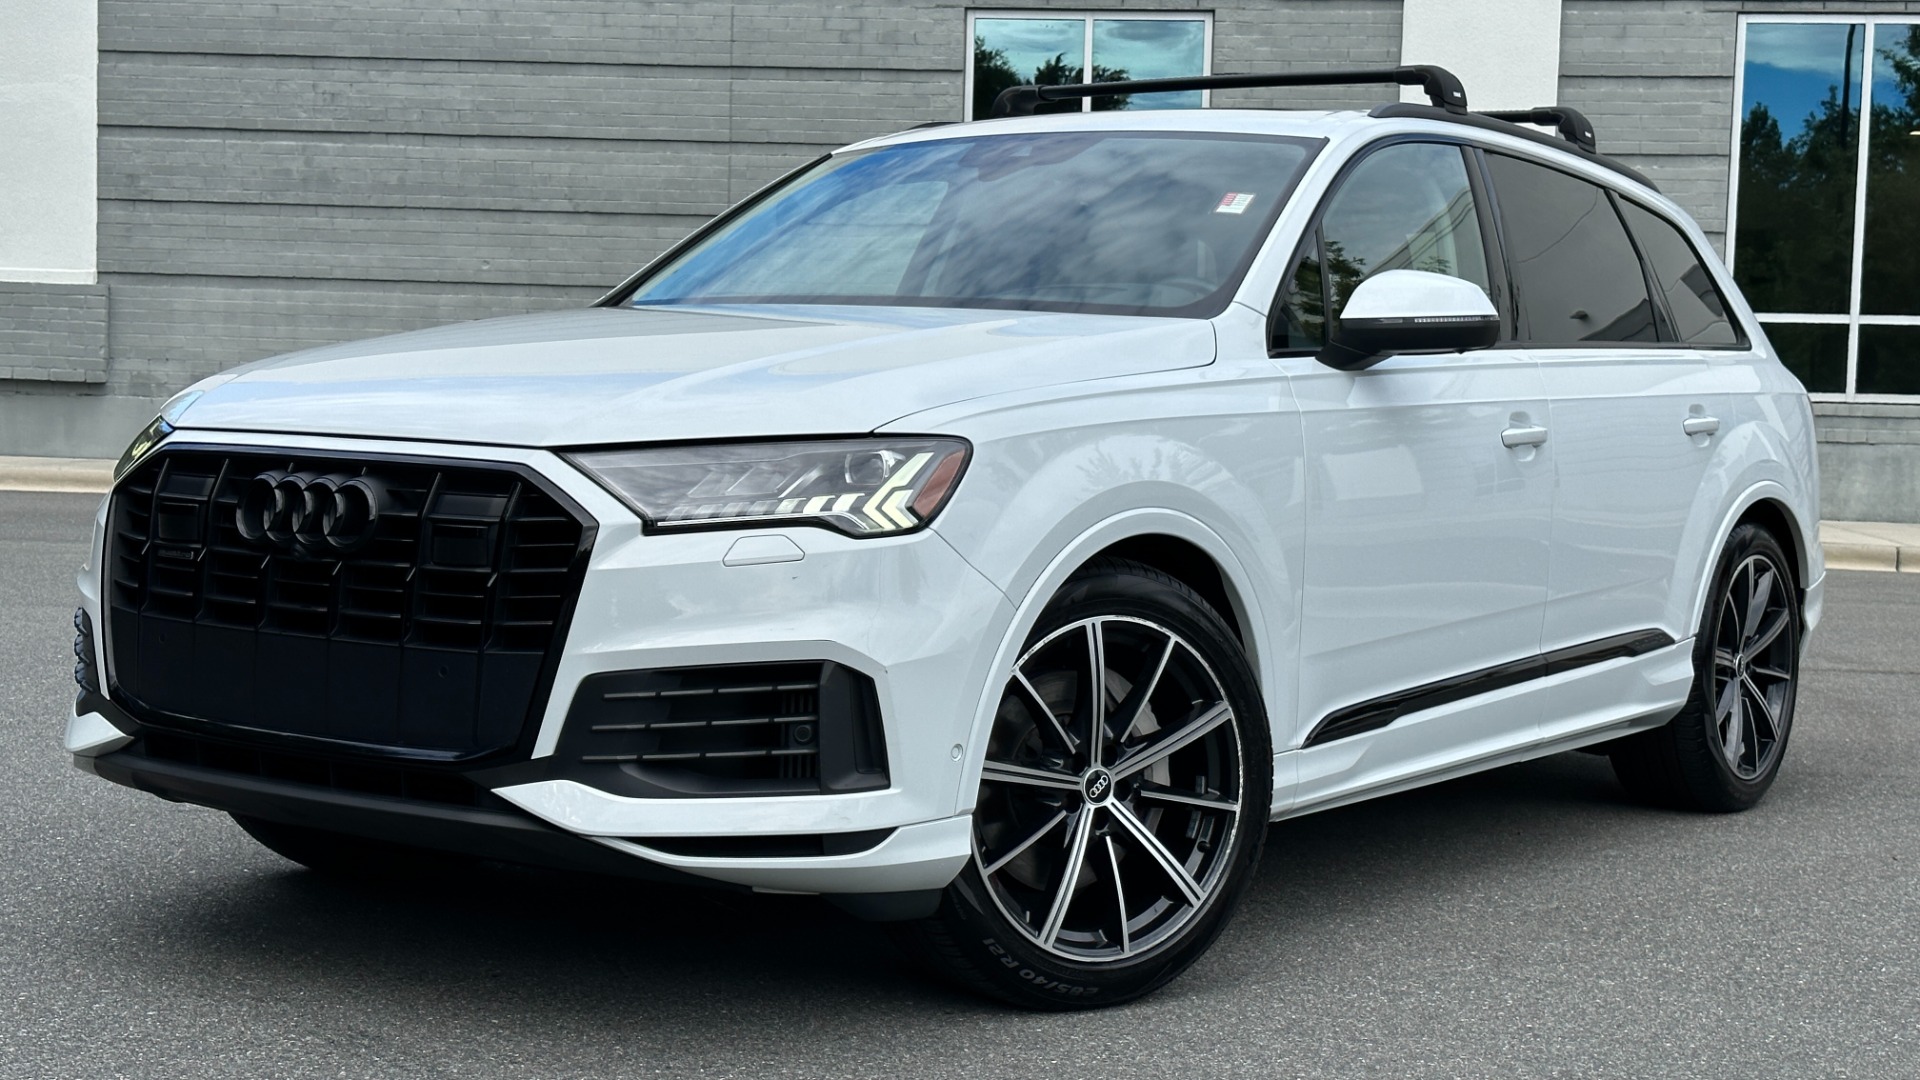 Used 2021 Audi Q7 PRESTIGE / BLACK OPTIC / BLACK EMBLEMS / TOWING PACKAGE for sale $54,500 at Formula Imports in Charlotte NC 28227 1